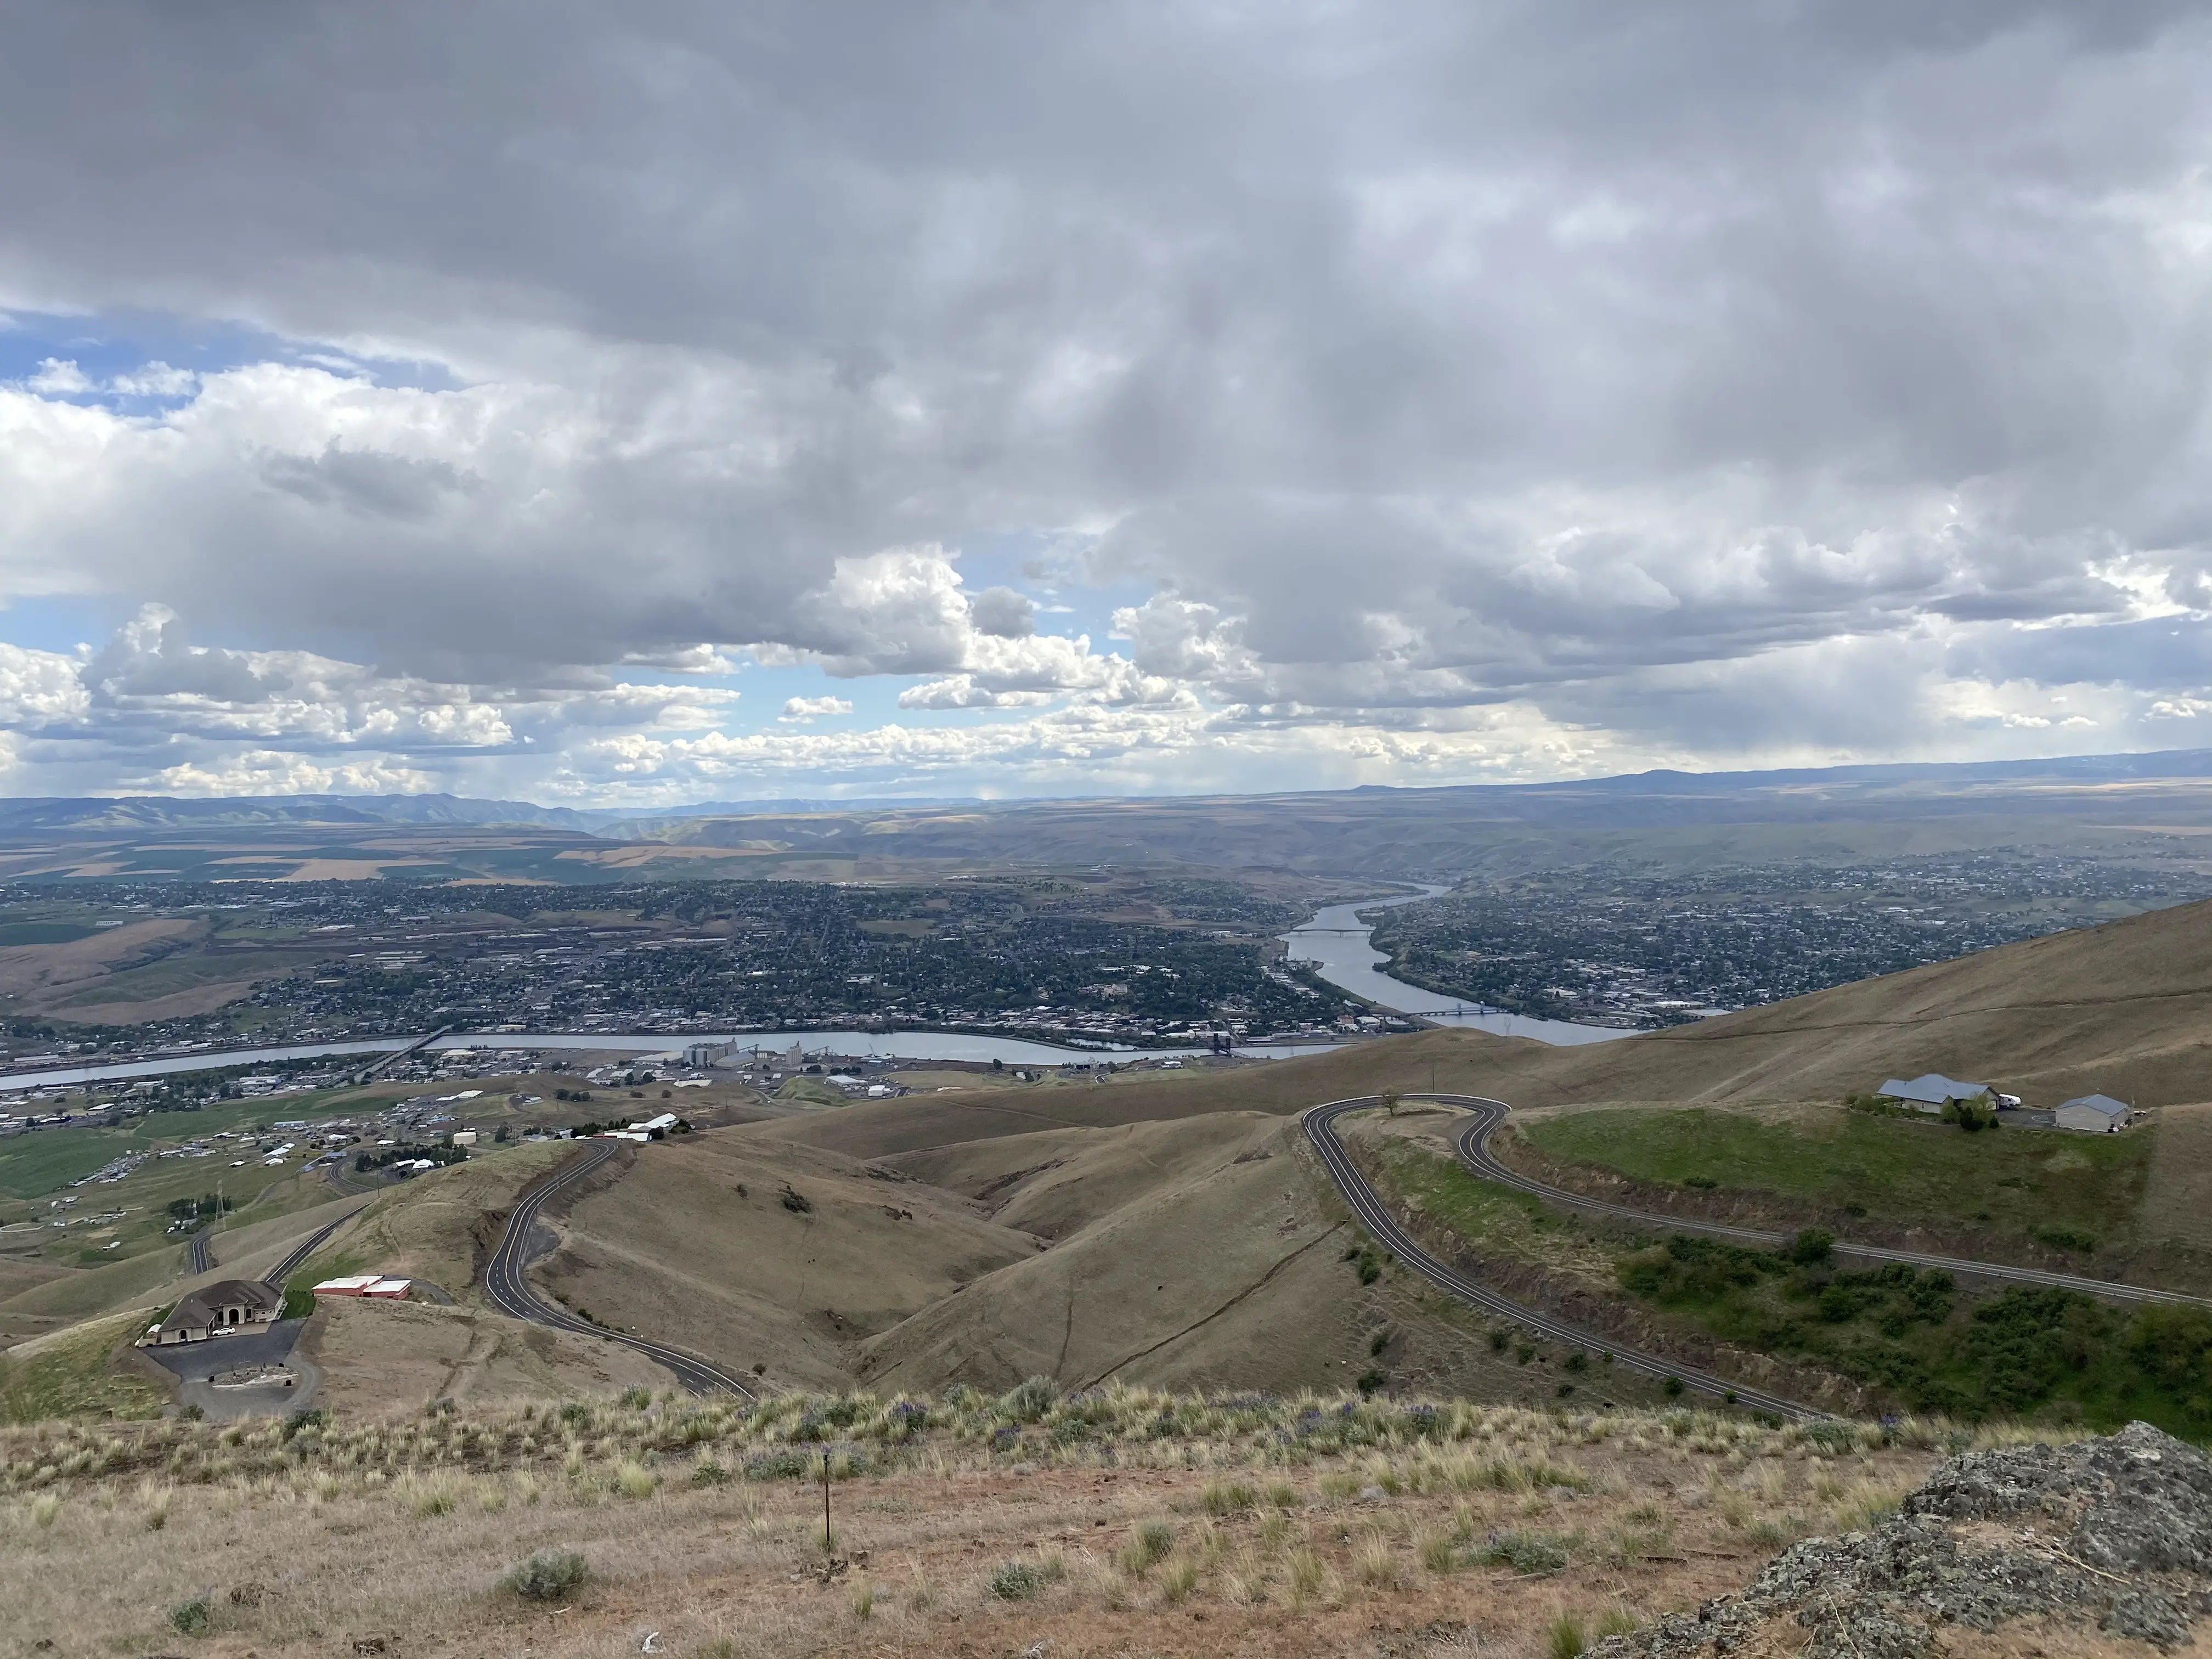 View from north of Clarkston / Lewiston looking south towards the Clearwater / Snake confluence